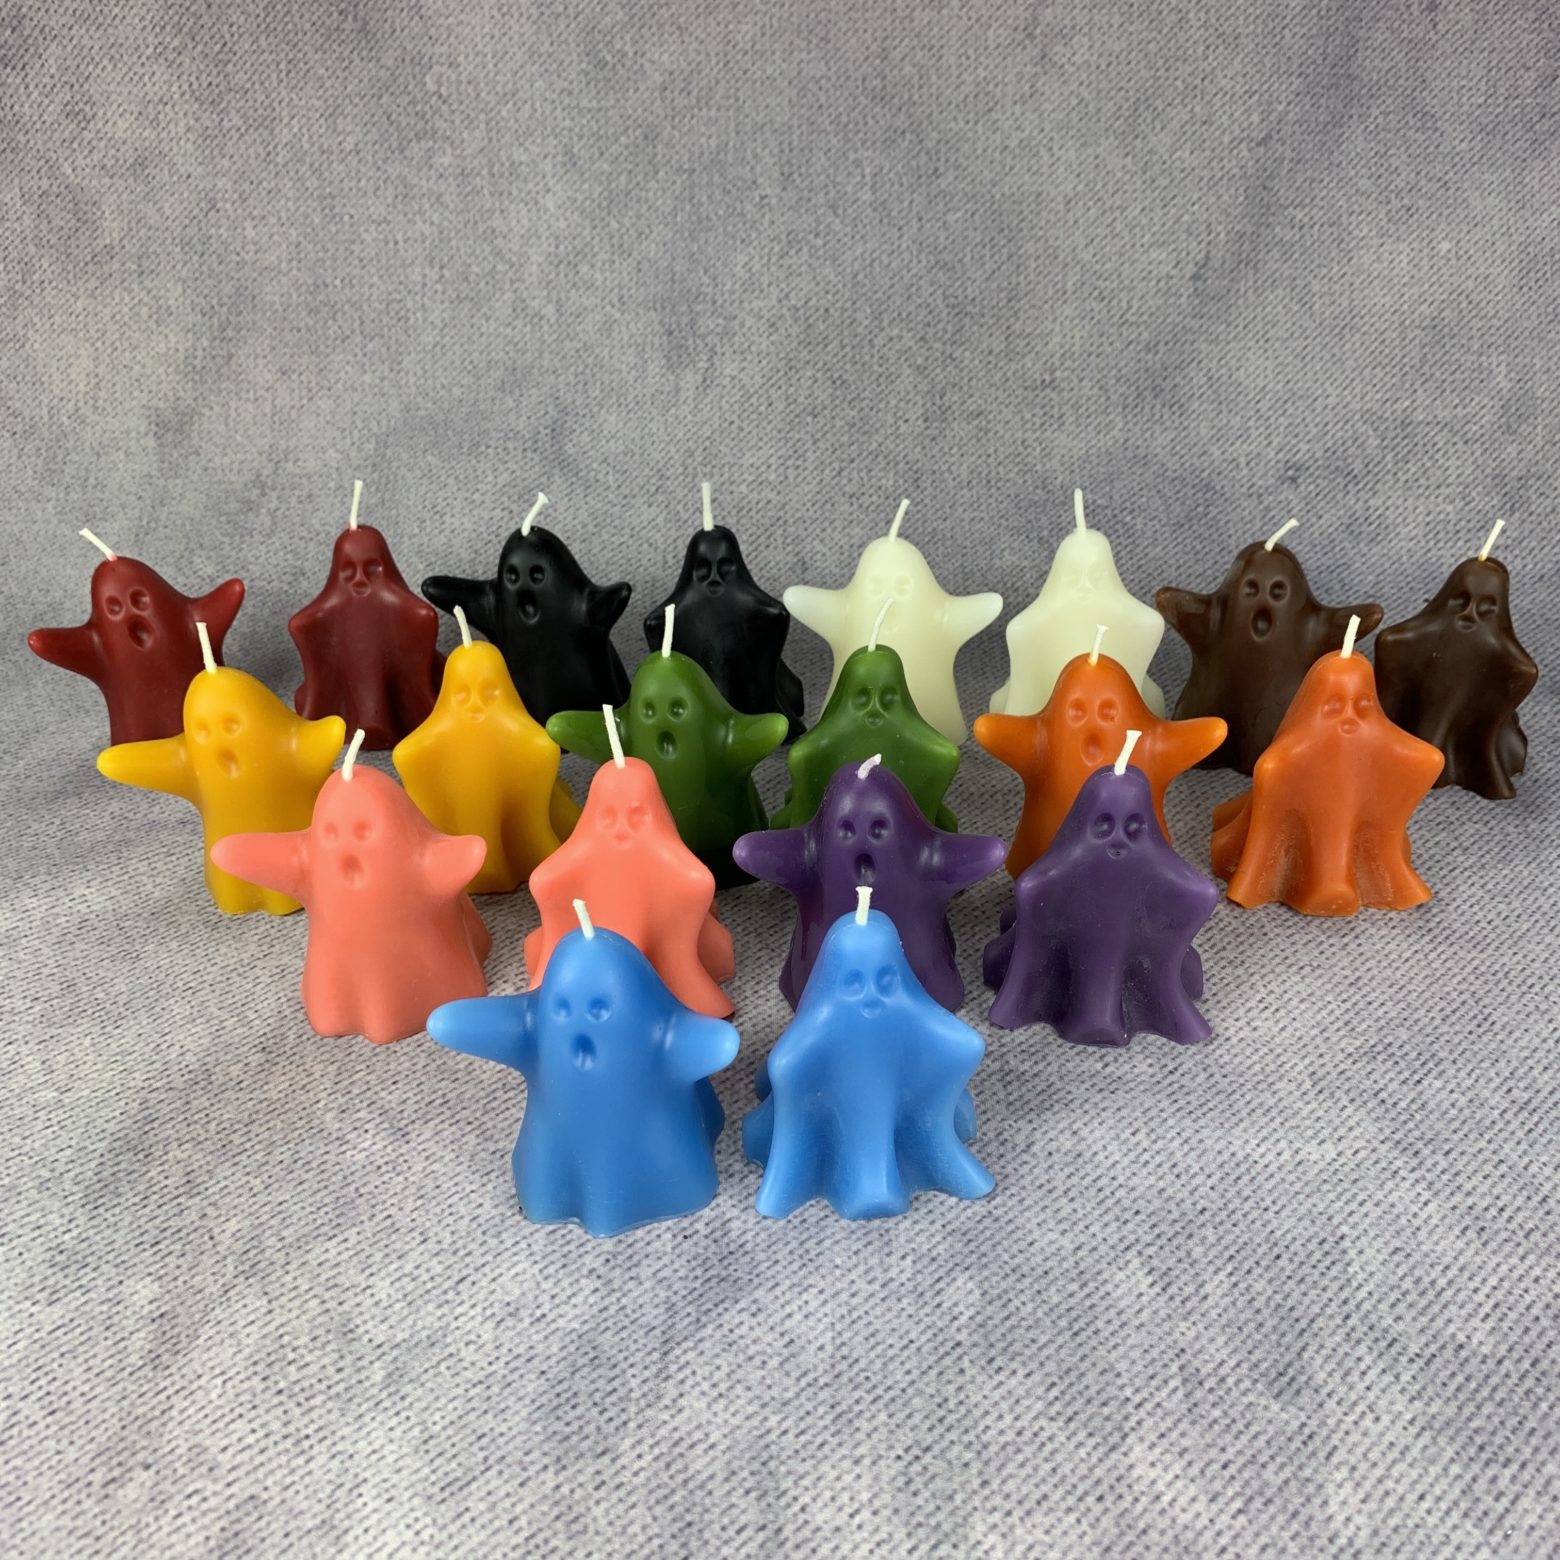 Beeswax Wishing Ghosts Spell Candle Set